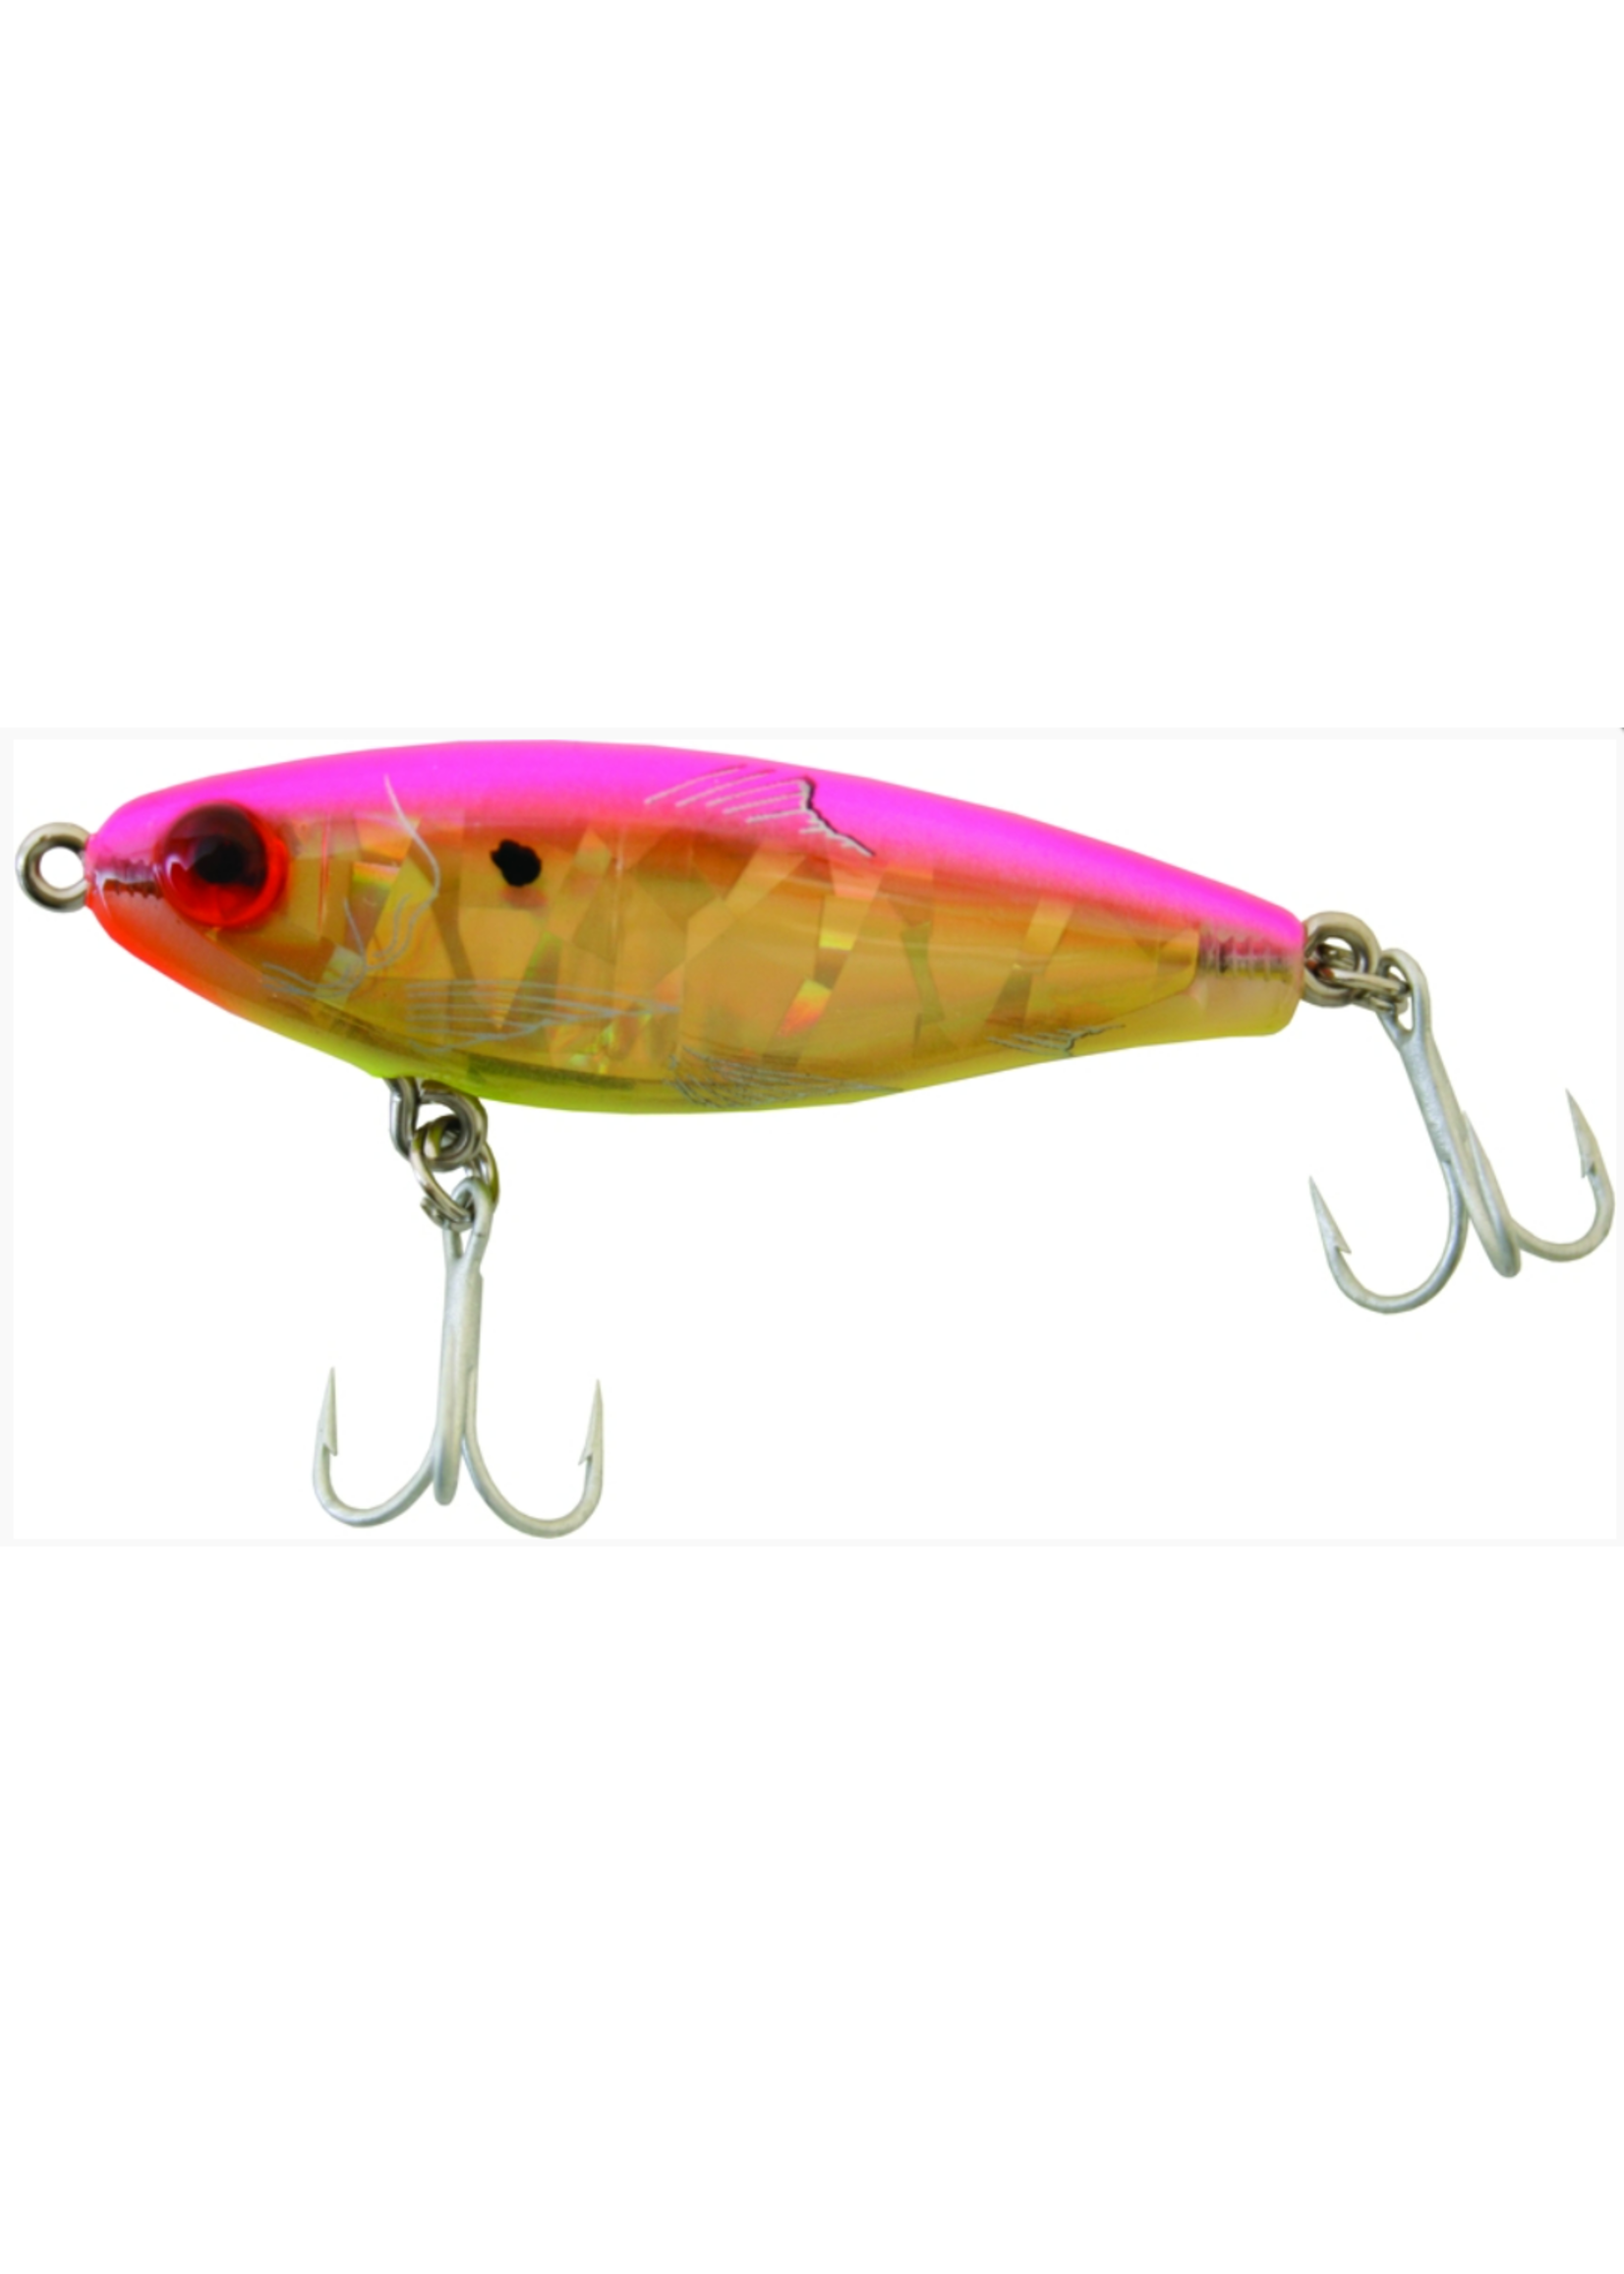 MirrOdine Suspending Twitchbait, 2 5/8 - Pink Back Chartreuse Belly Gold  Broken Glass - Brothers Outdoors LLC